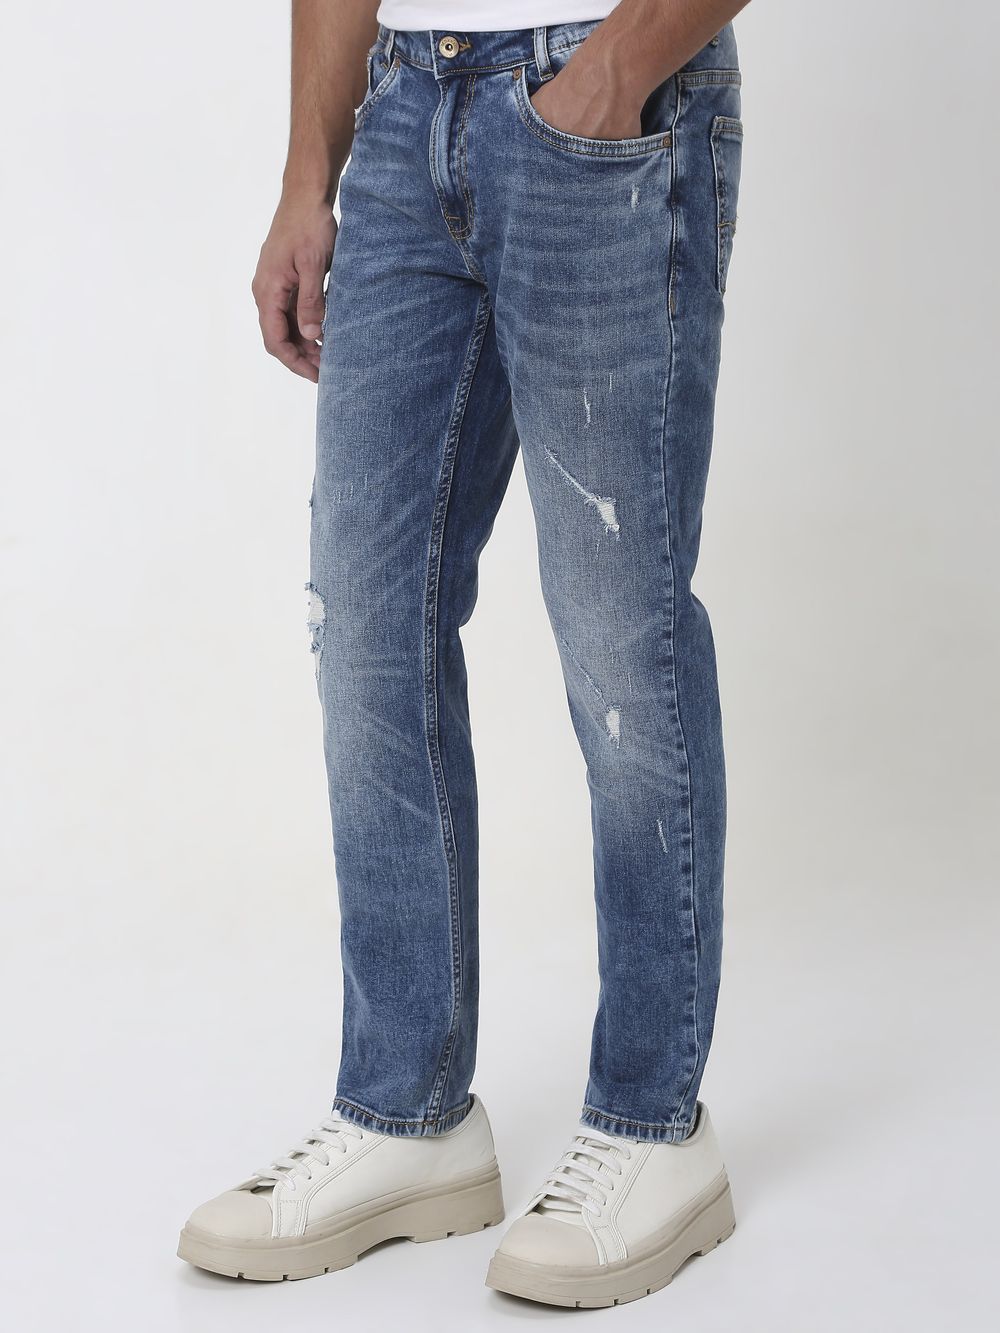 Tinted Super Slim Fit Distressed Stretch Jeans